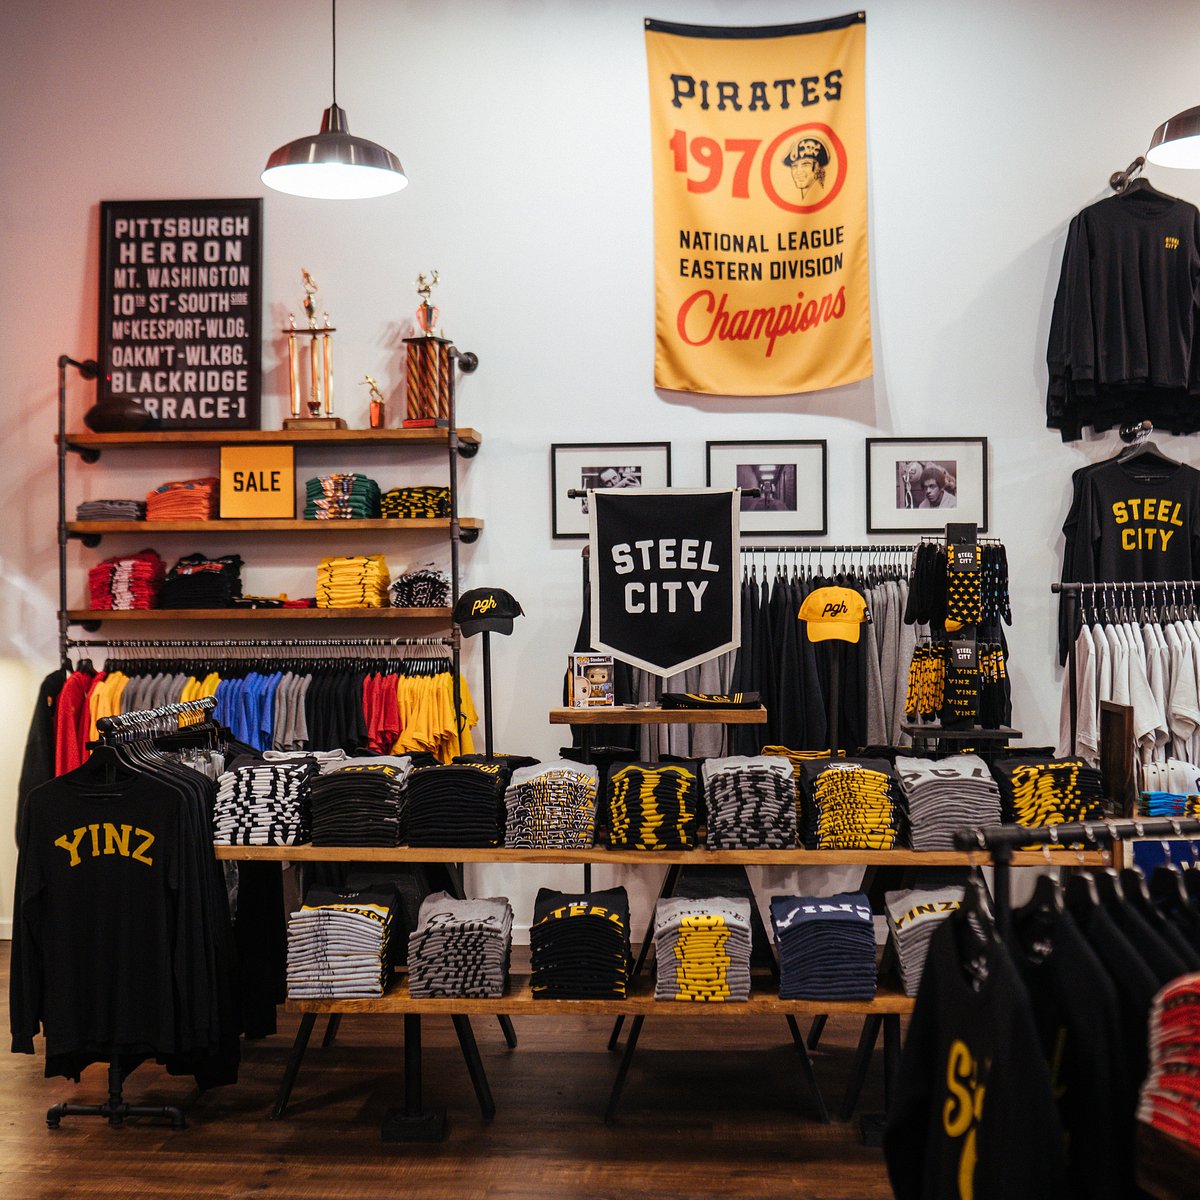 PIRATES OUTFITTERS - 115 Federal St, Pittsburgh, Pennsylvania - Fashion -  Phone Number - Yelp